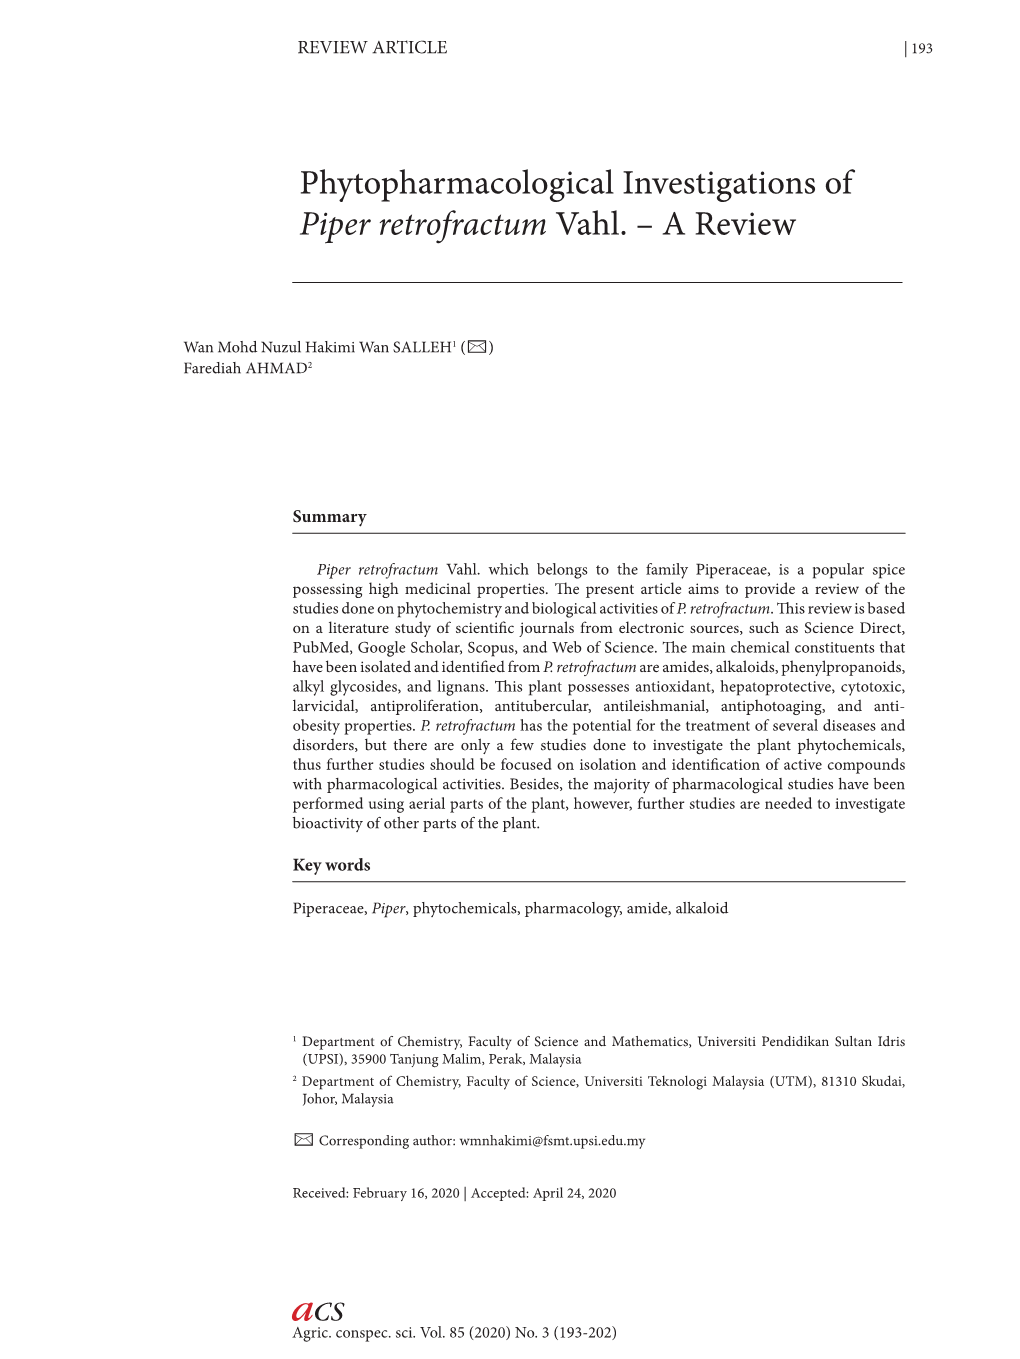 Phytopharmacological Investigations of Piper Retrofractum Vahl. – a Review